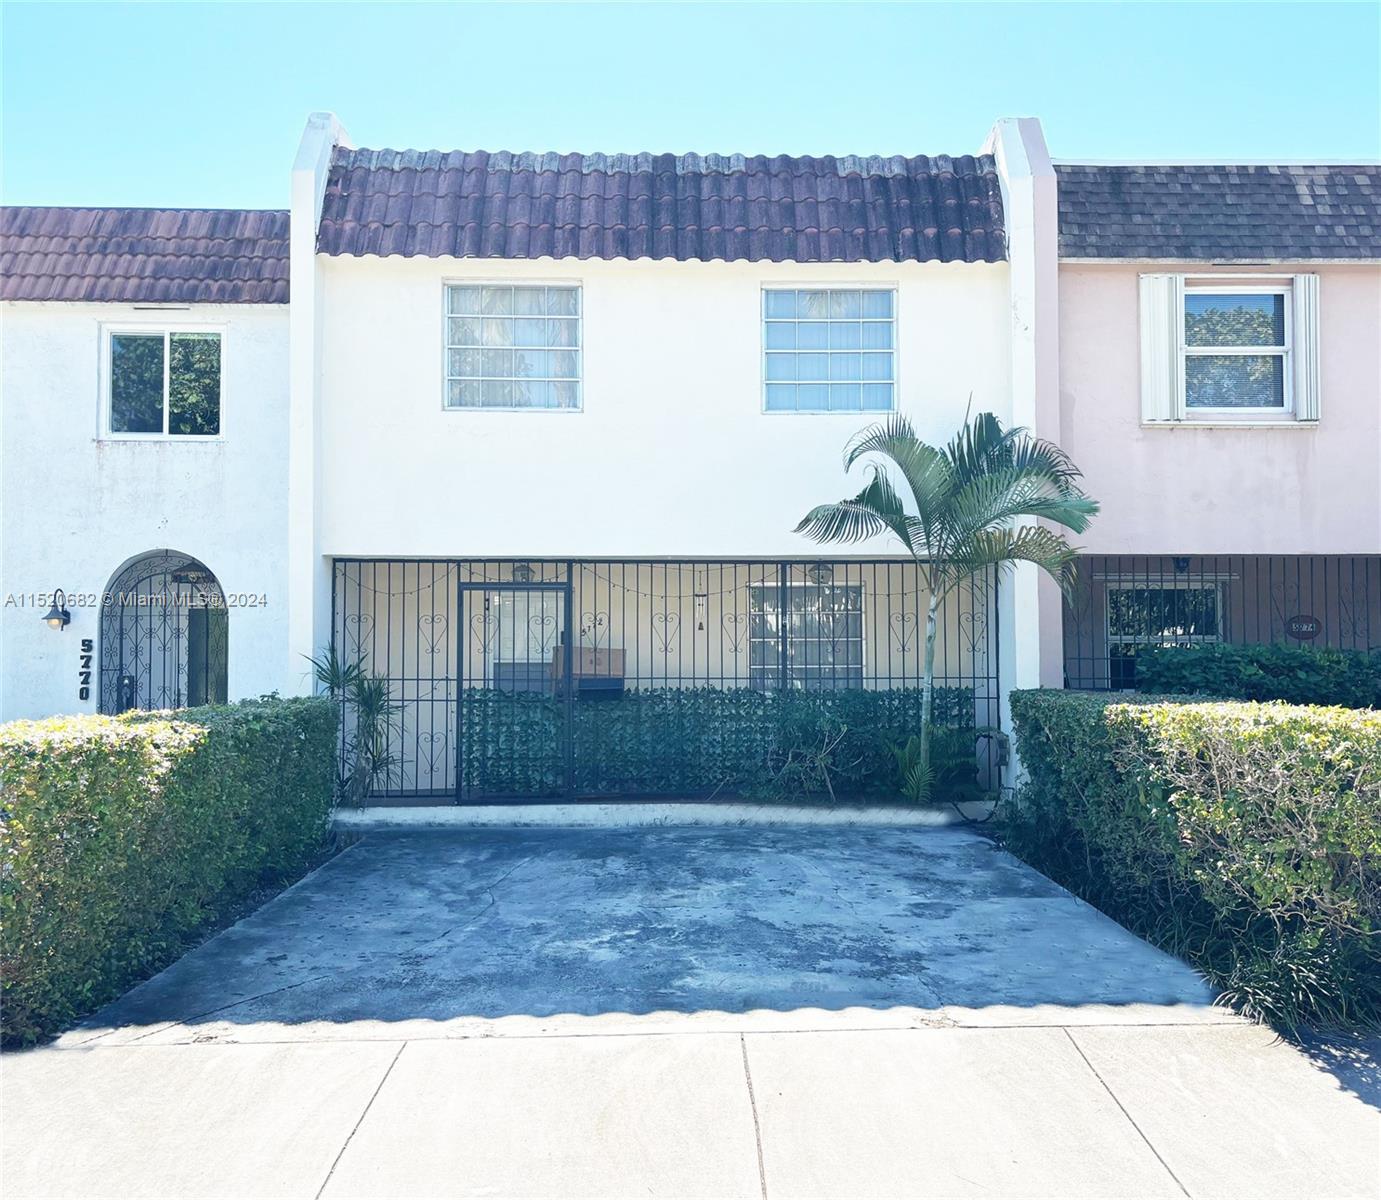 PRISTINE SPACIOUS SOUTH MIAMI 3 BEDROOM 2.5 BATH TWO STORY TOWNHOUSE WITH BRIGHT OPEN FLOOR PLAN, FO